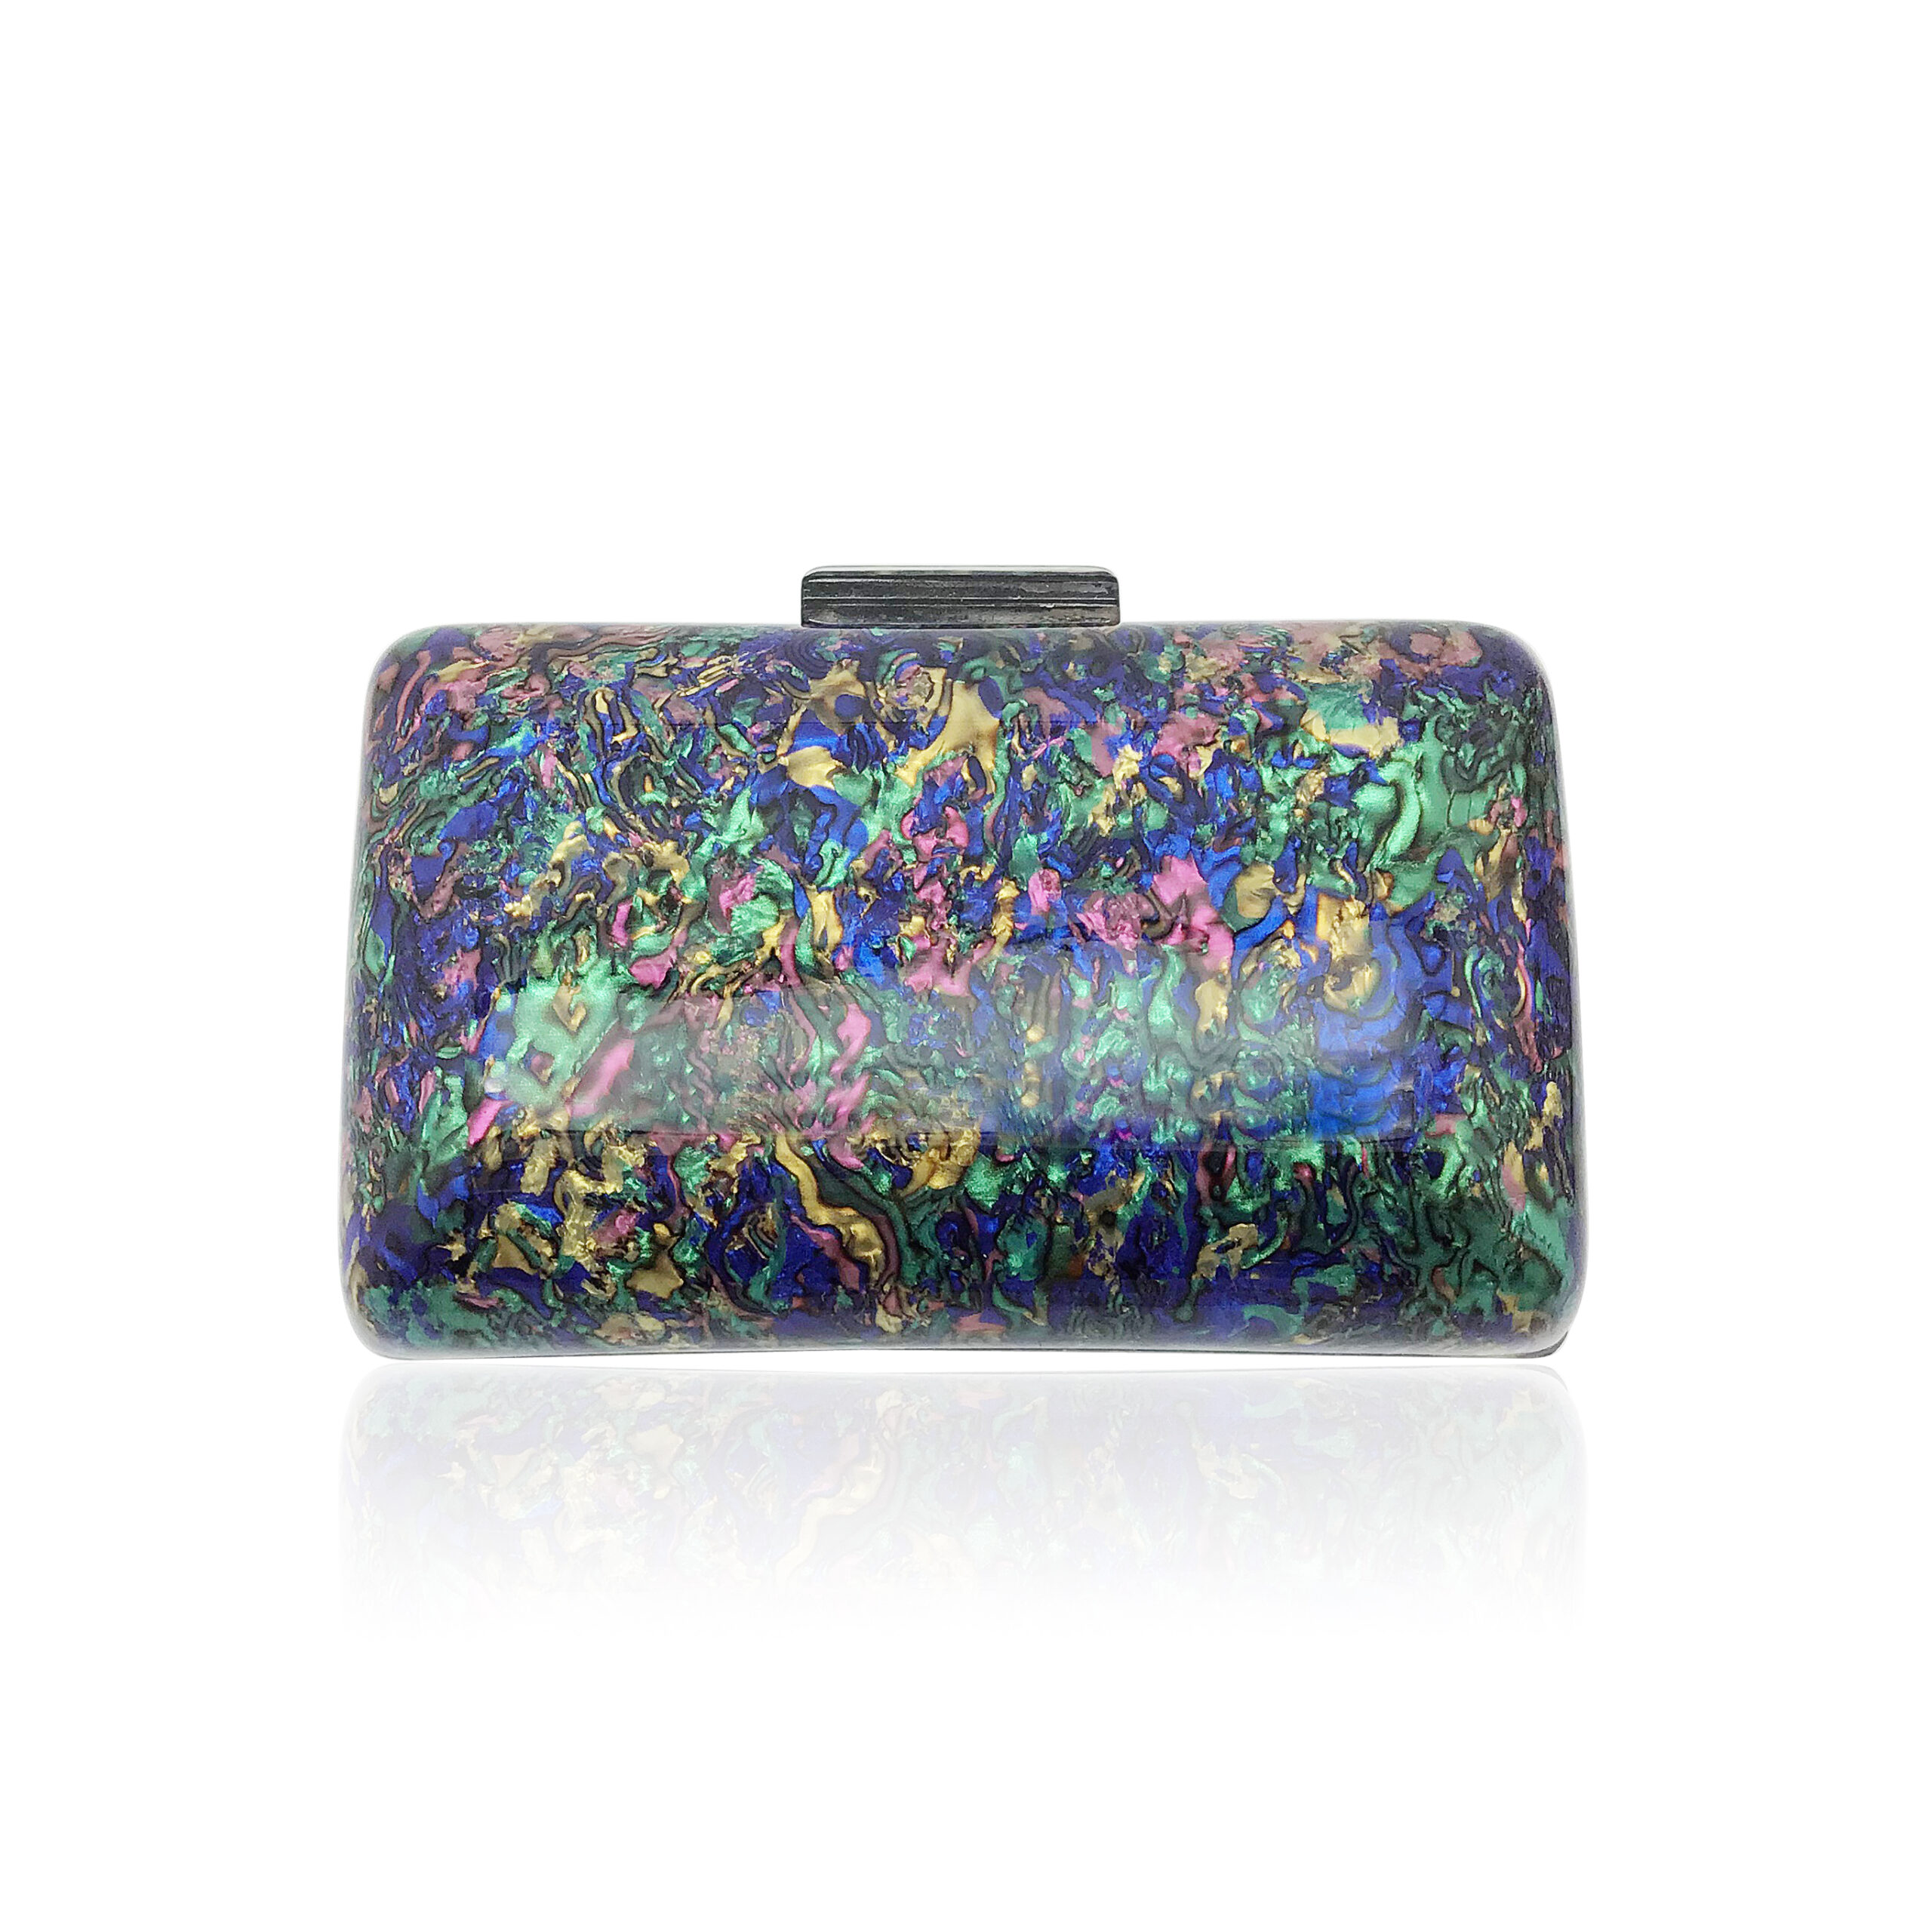 Acrylic Colour Clutch |Gwyneth|Jeanette Maree|Shop Online Now